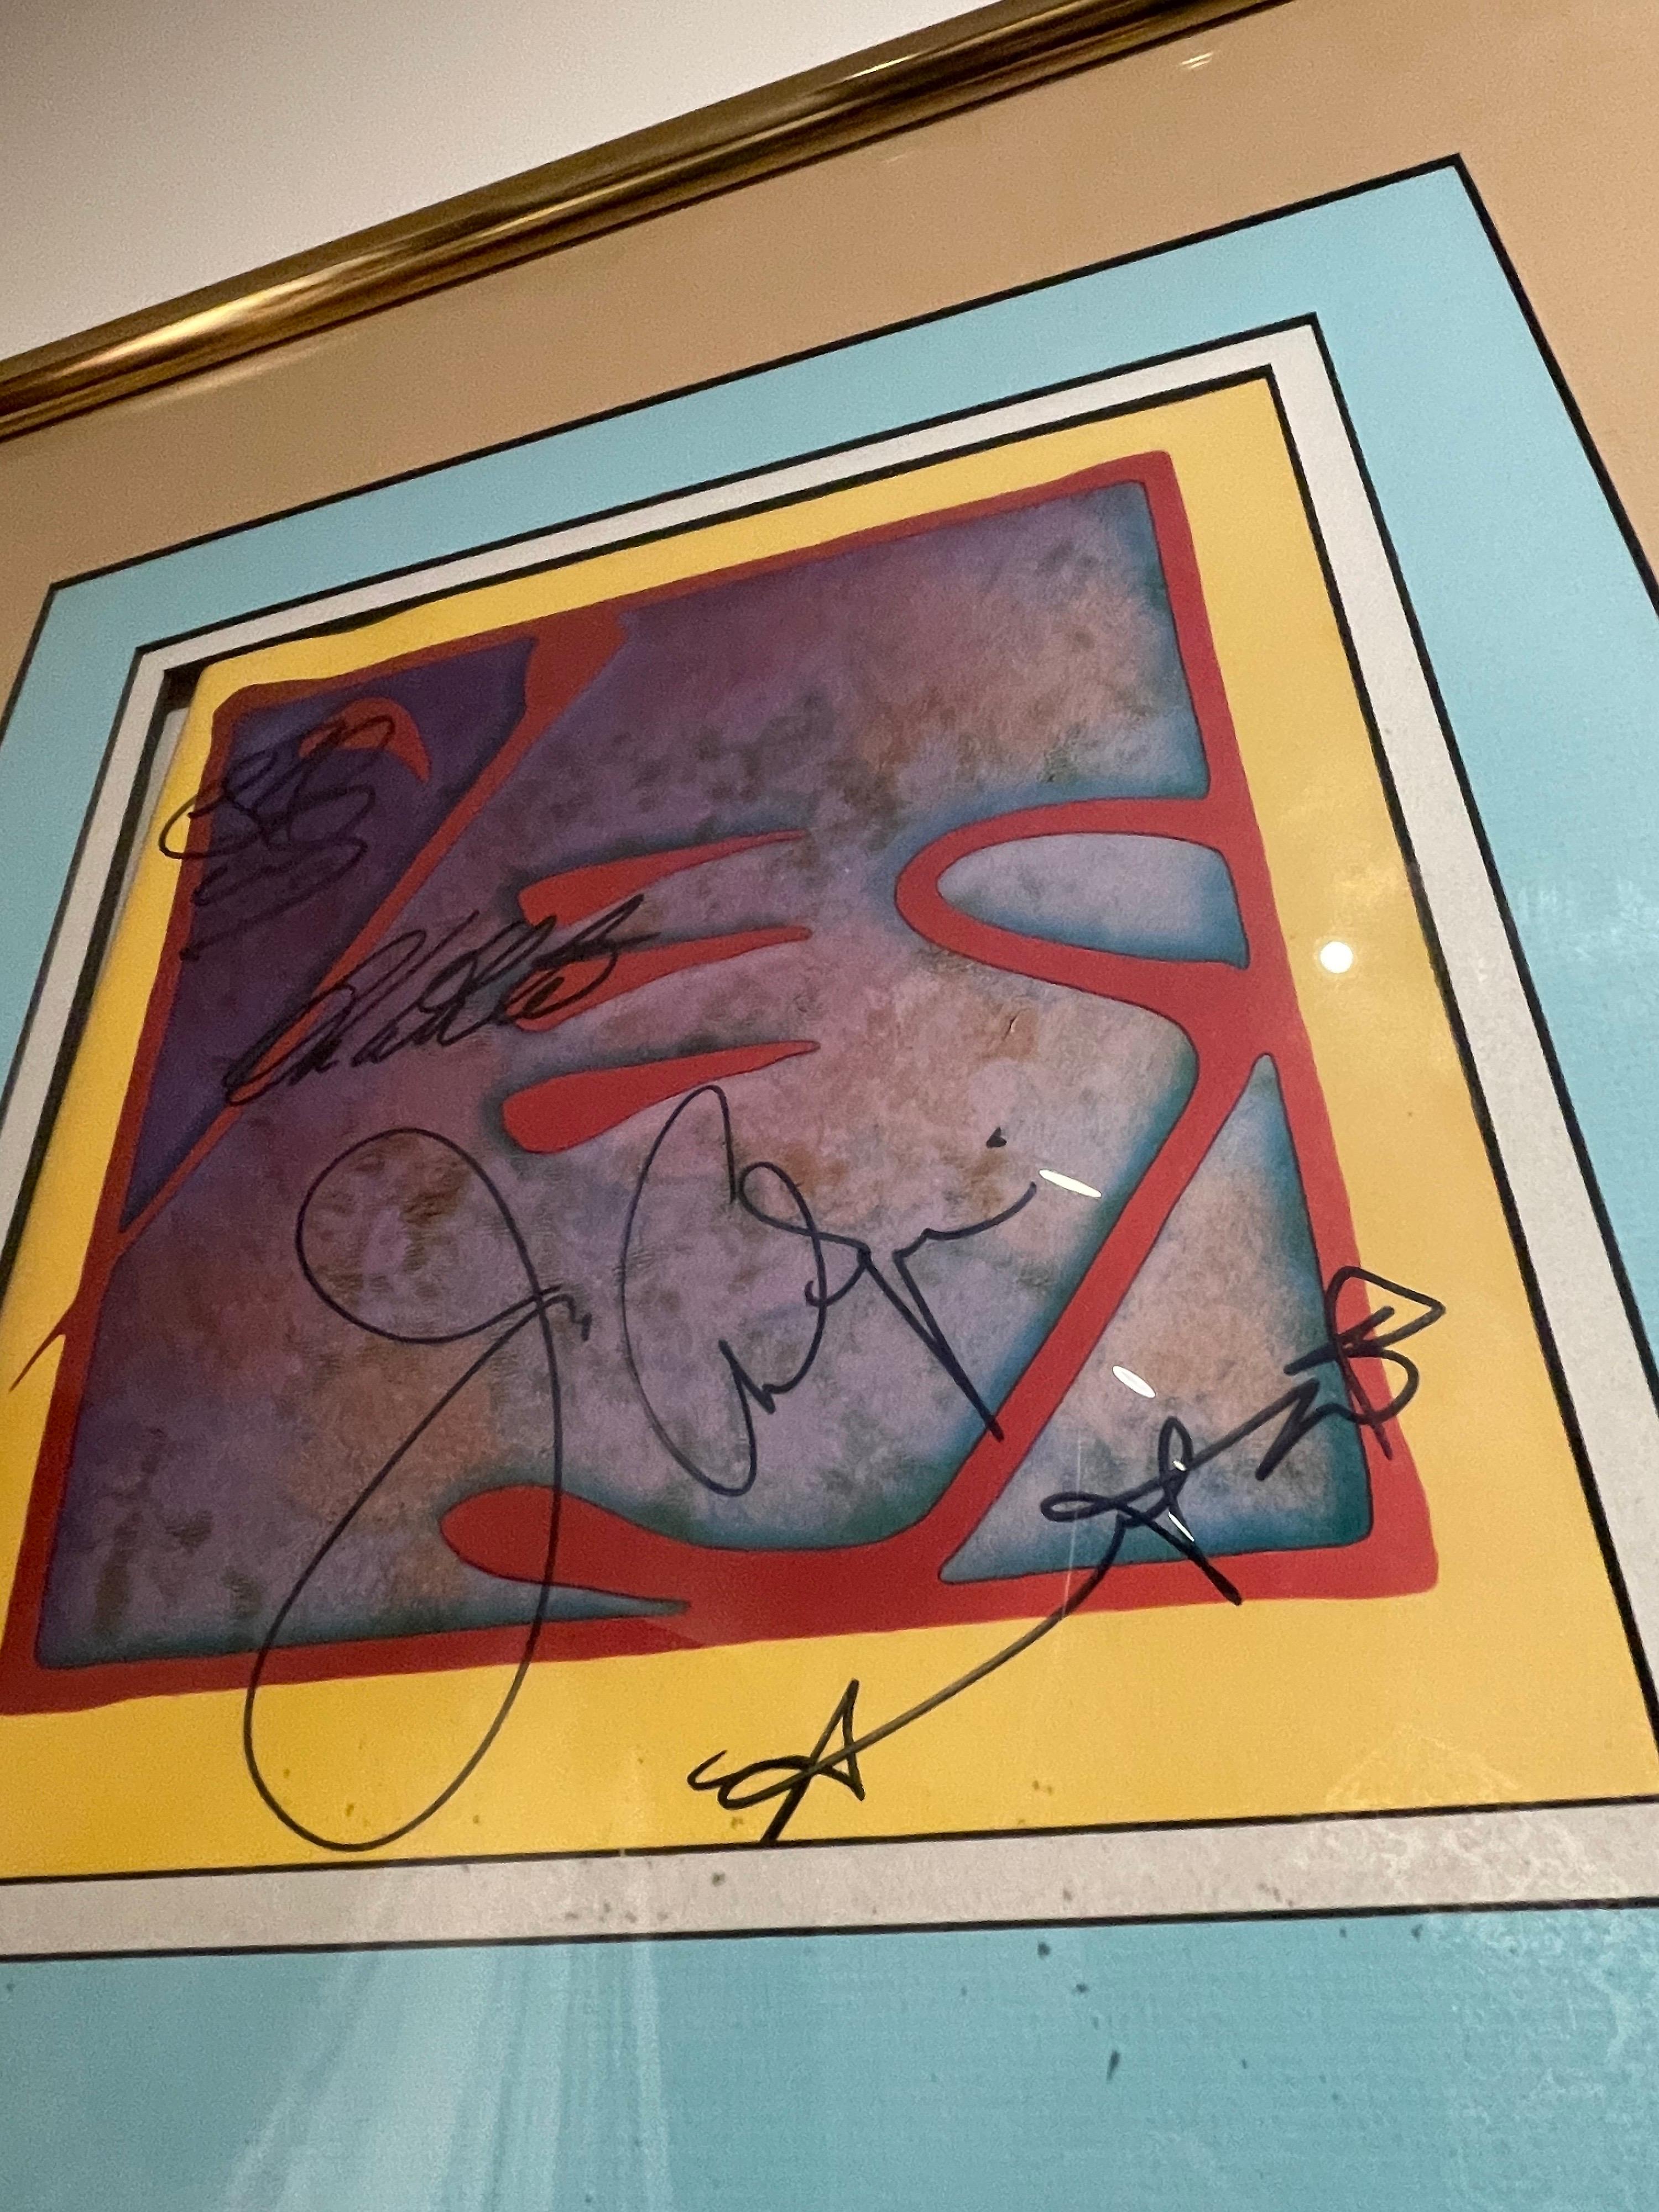 North American Signed Record & Sleeve Yes Yesyears Album by Members Framed For Sale